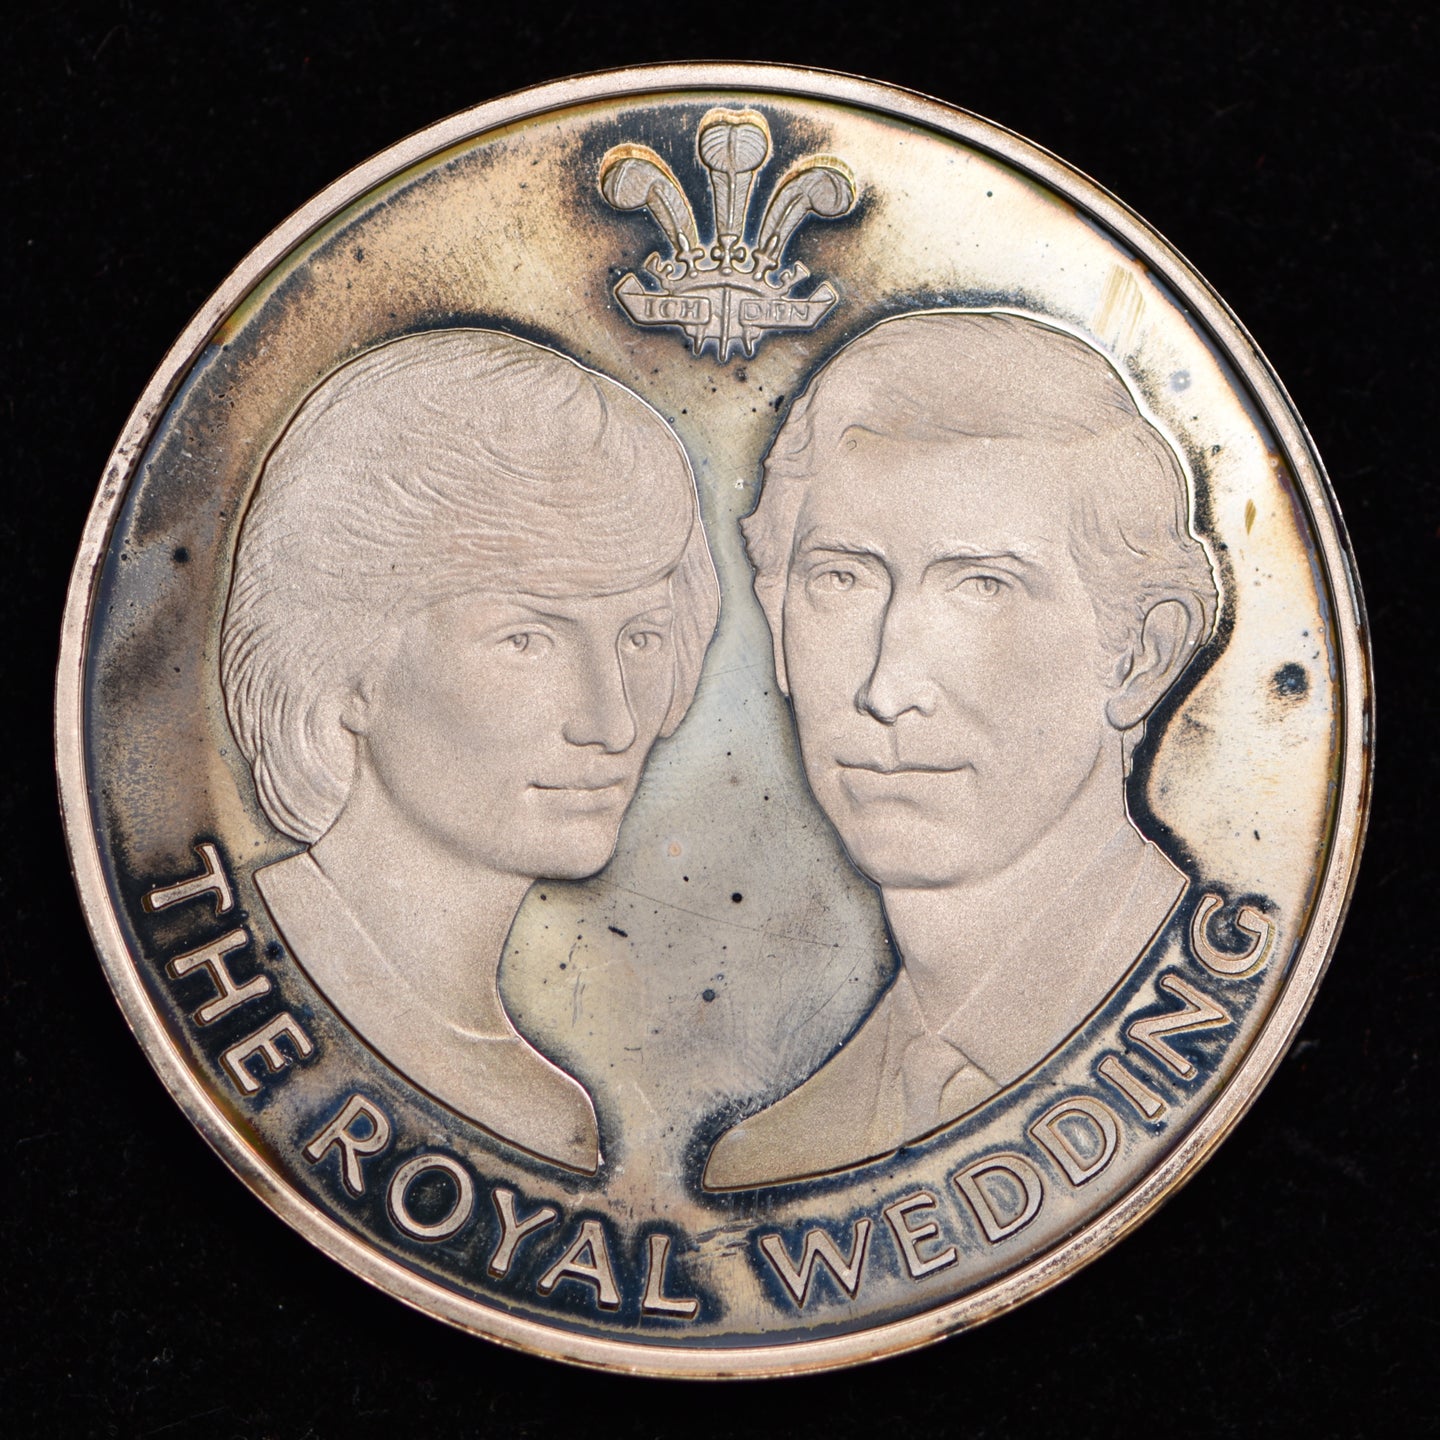 Marriage of Prince Charles and Lady Diana medal